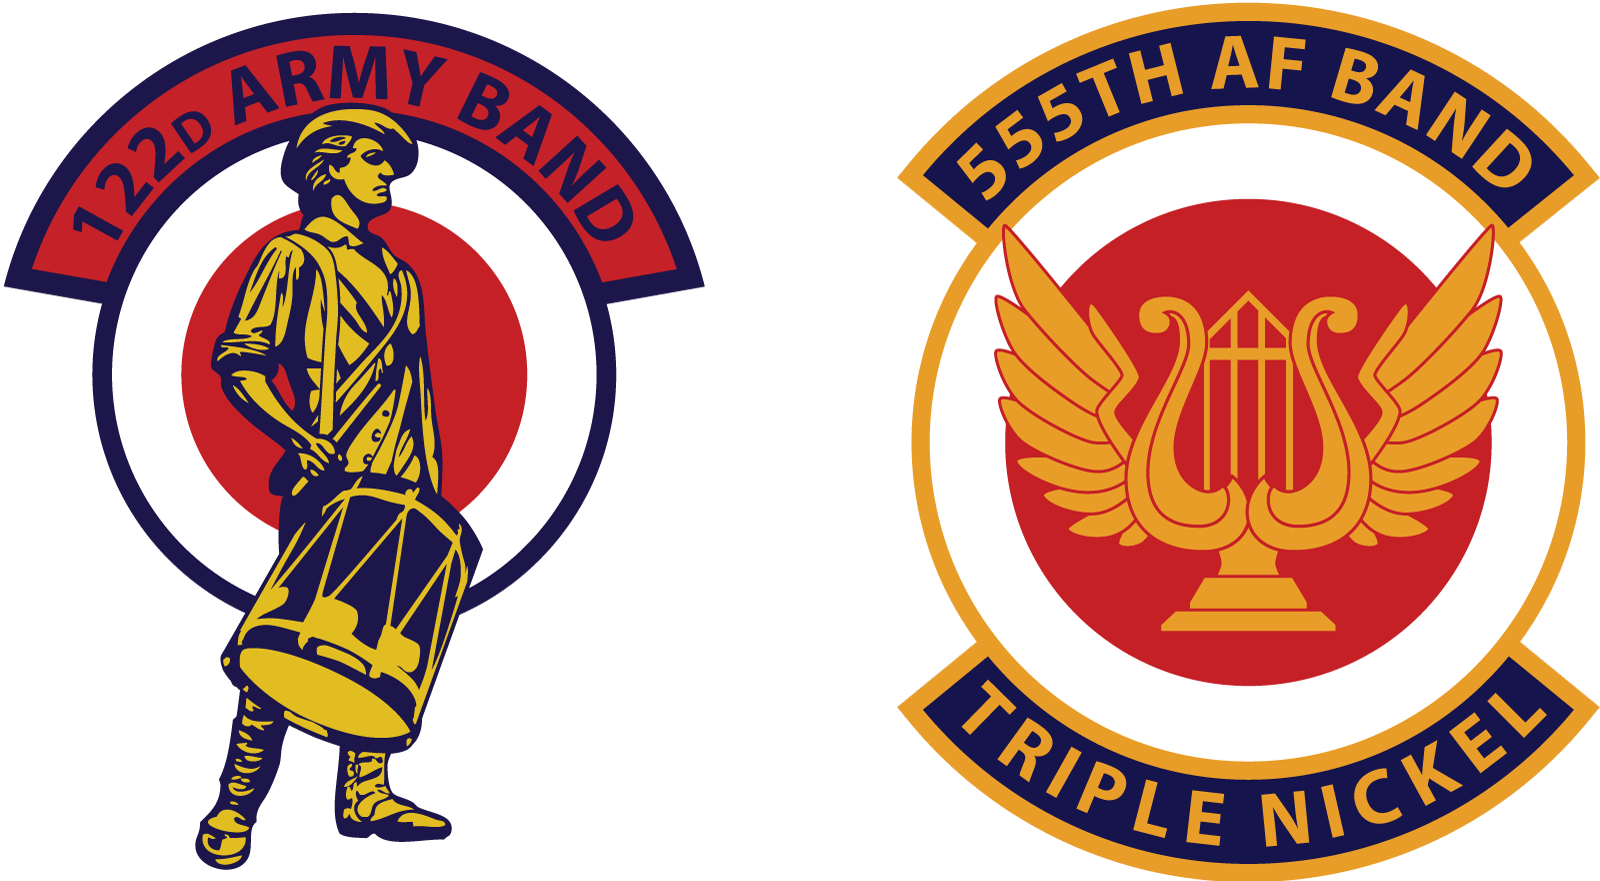 122nd Army Band and 555th Air Force Band